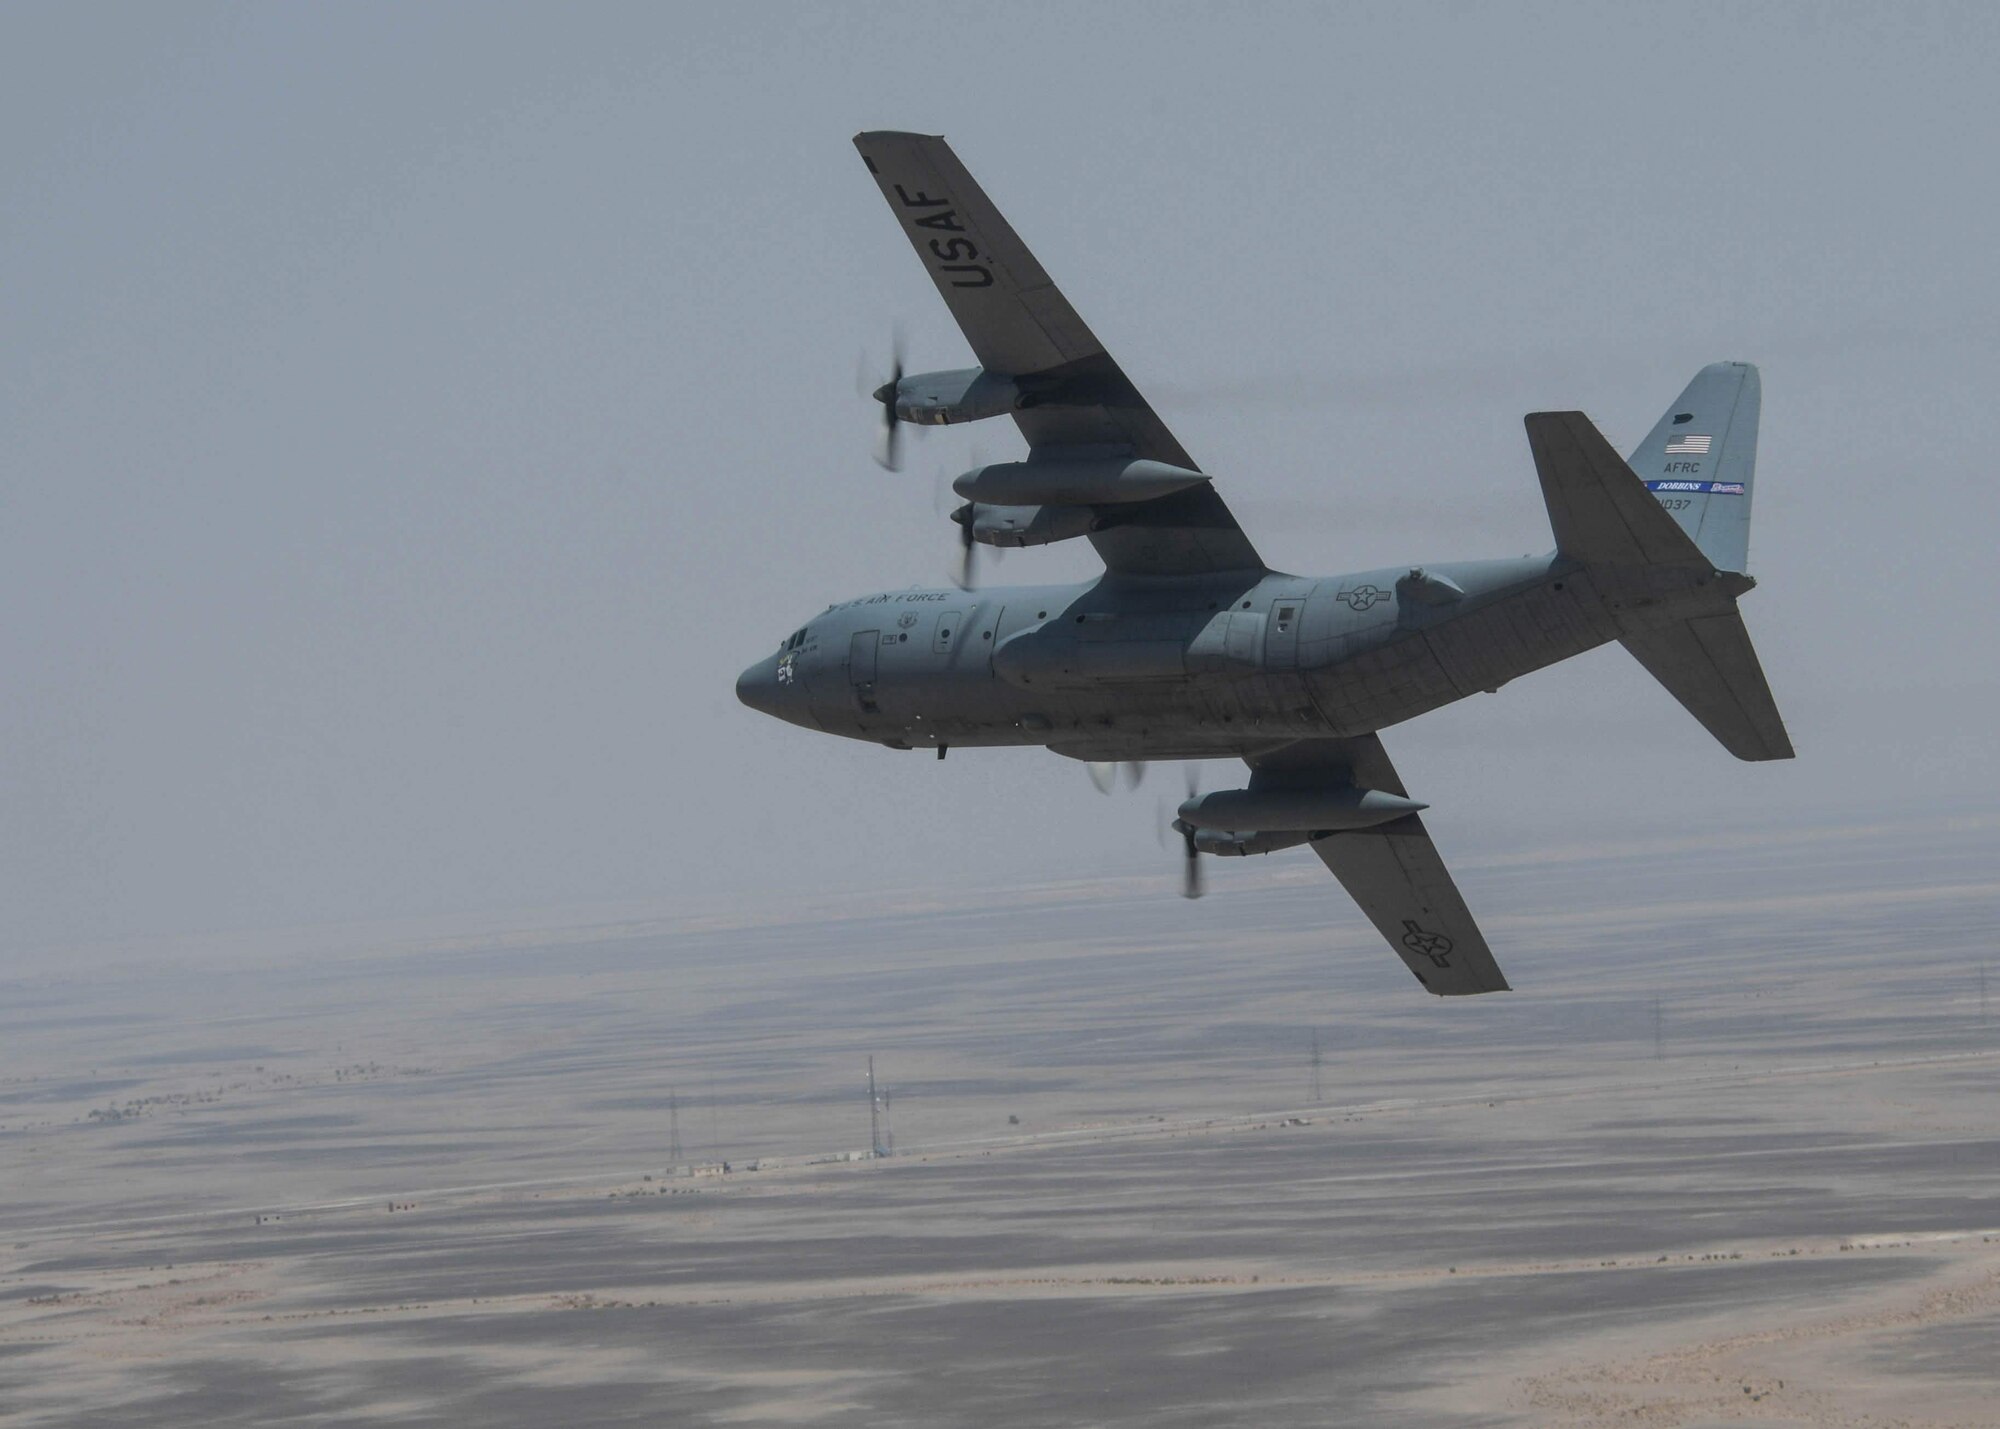 A C-130H3 from Dobbins Air Reserve Base, Ga., banks right as part of a controlled turn in a flight formation during Exercise Eager Lion on Sept. 1, 2019 in Jordan.